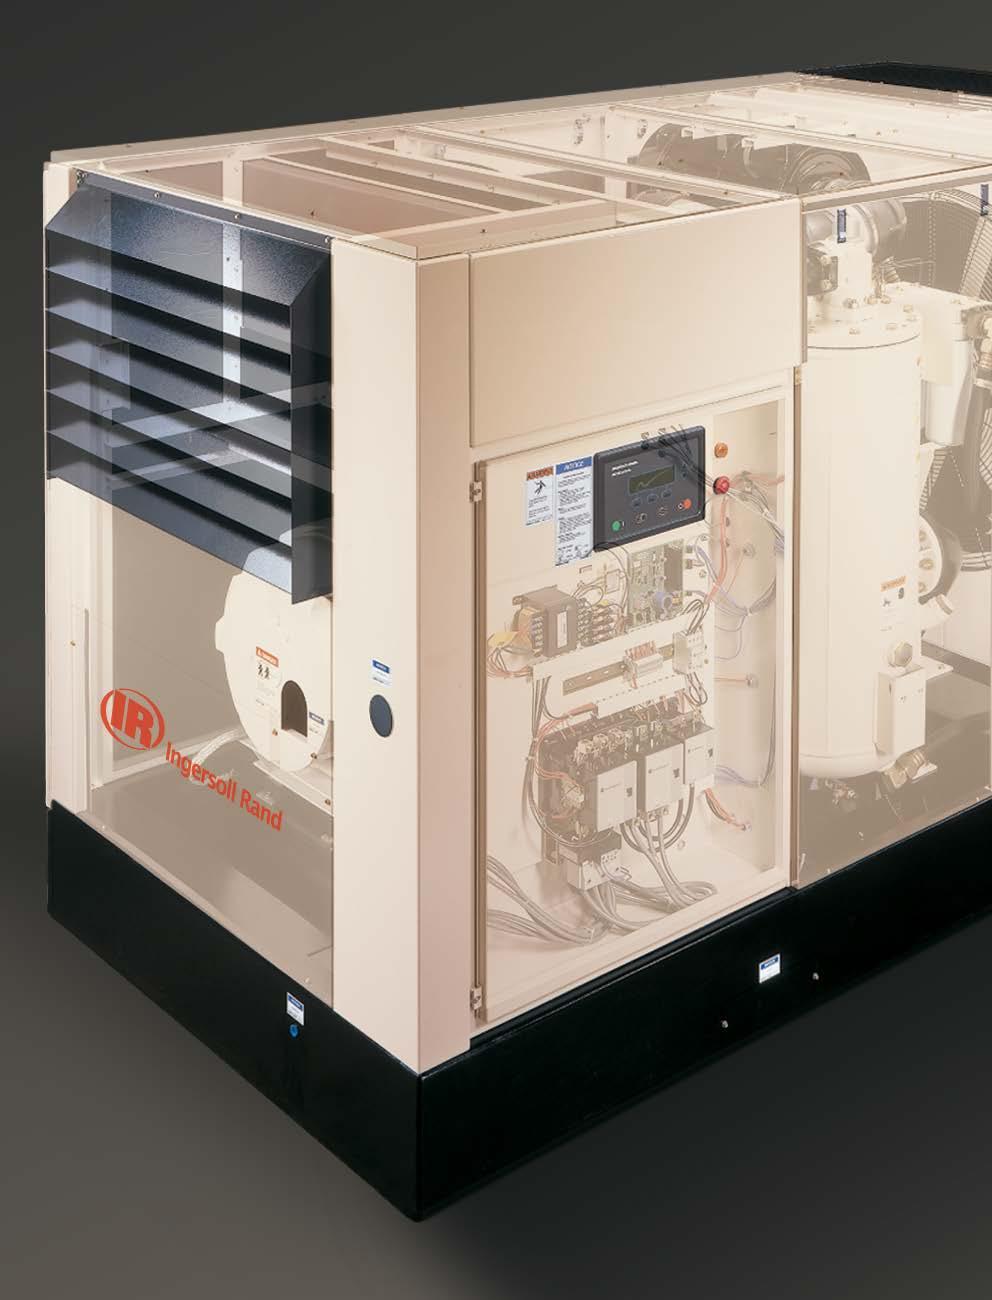 Superior Features That Reduce Operating Costs Ingersoll Rand rotary screw compressors add unequalled reliability, efficiency and productivity to virtually any compressed air system, and could save